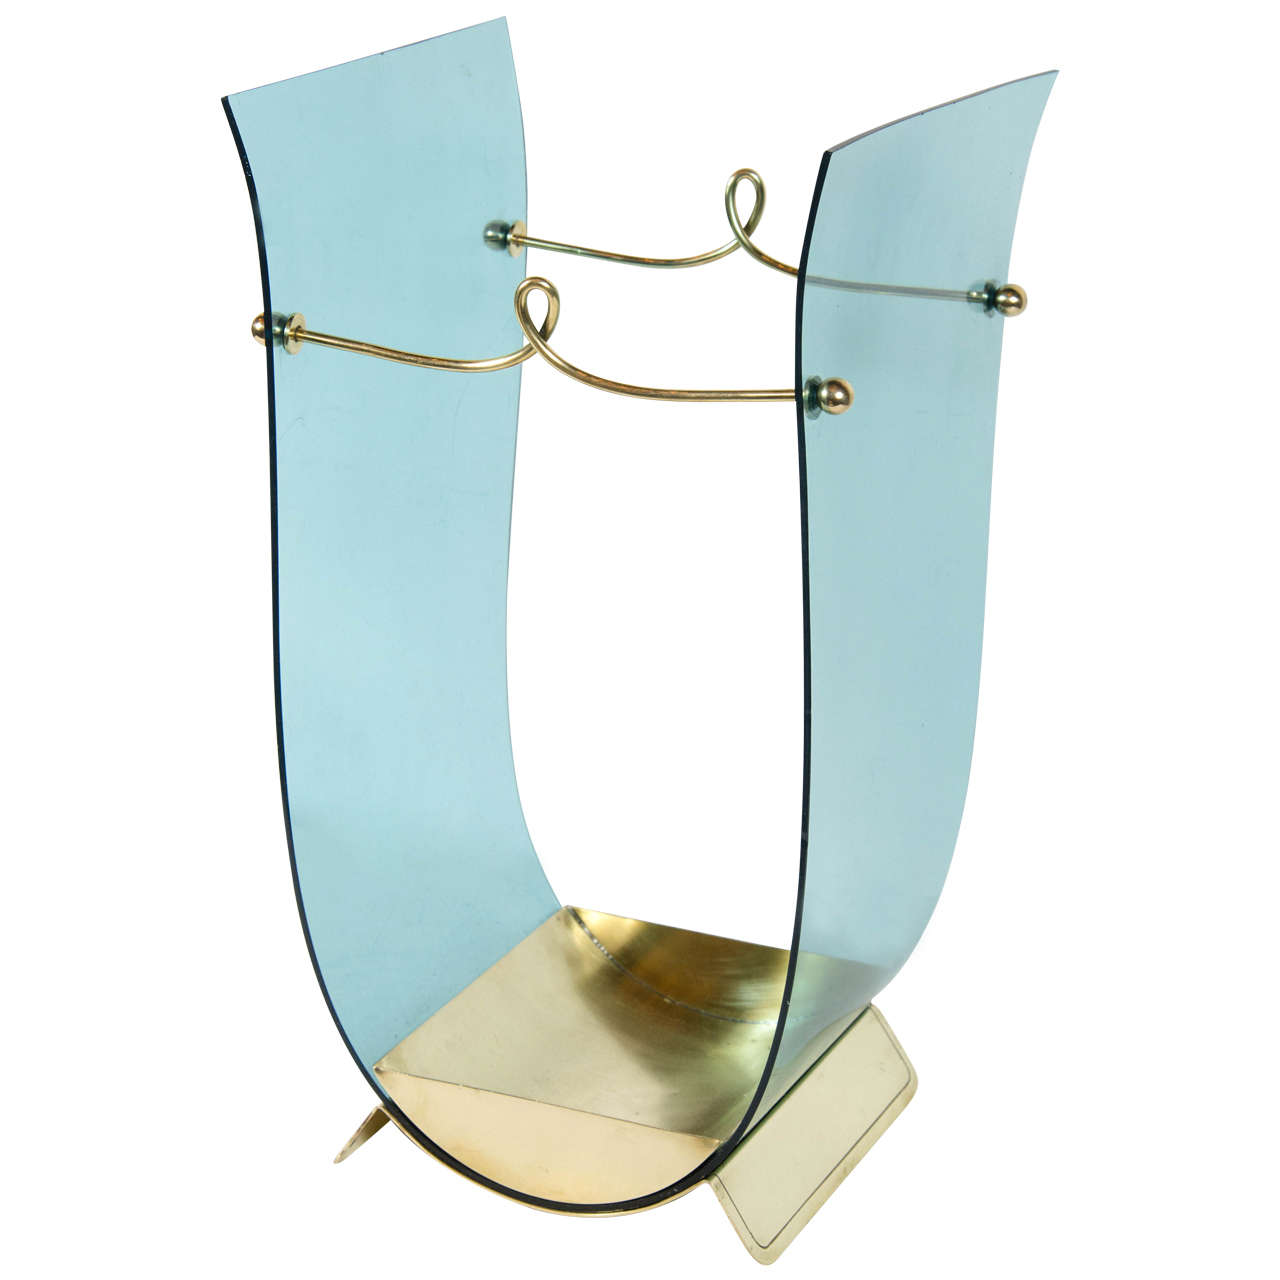 Gorgeous Mid-Century Modernist Umbrella Stand in the Manner of Adnet